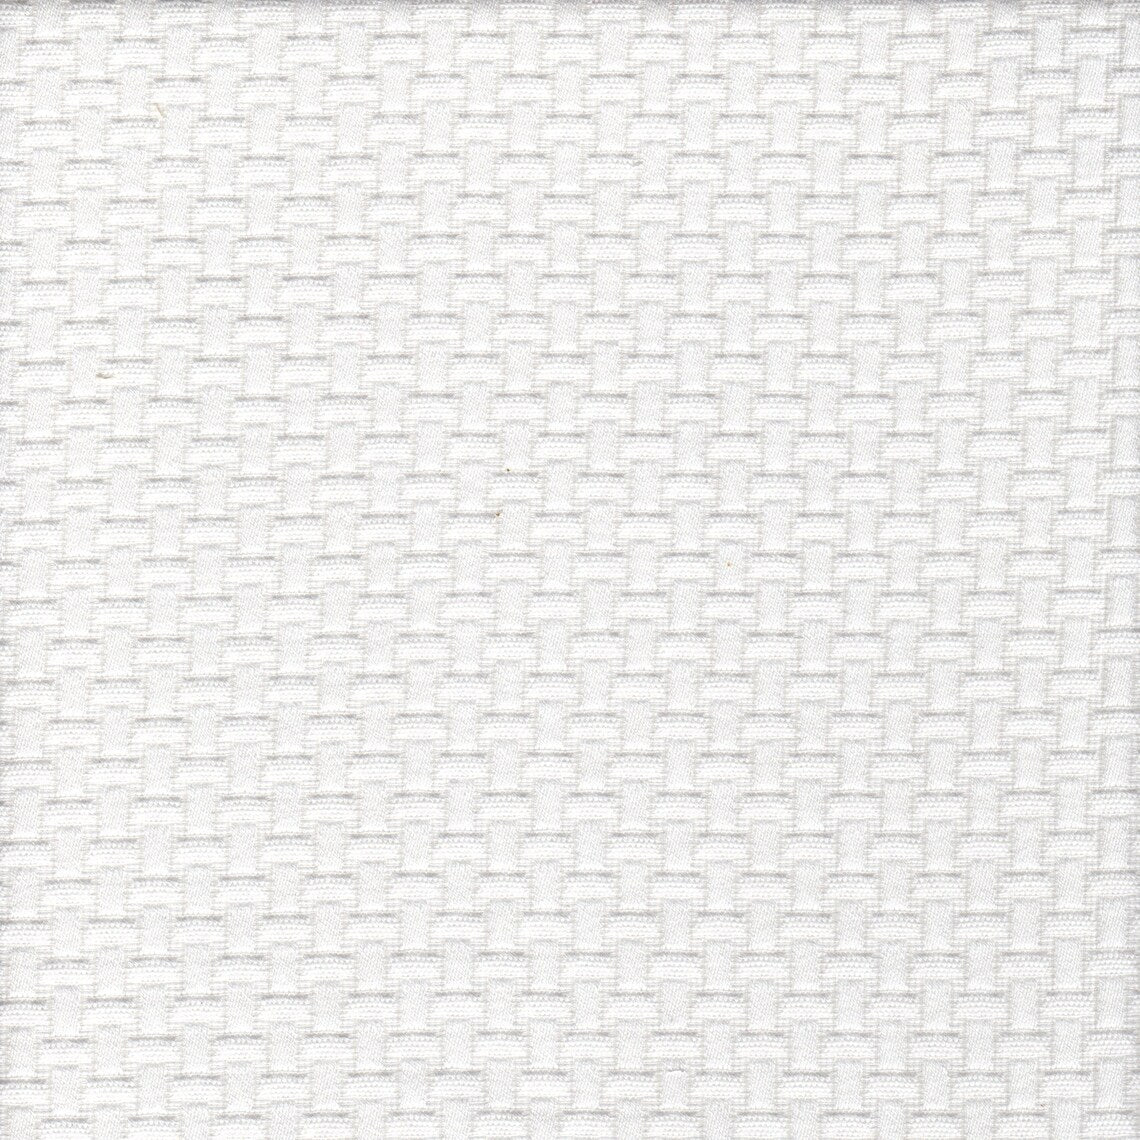 Tab Top Curtain Panels Pair in Basketry Antique White Basket Weave Matelasse - Small Scale